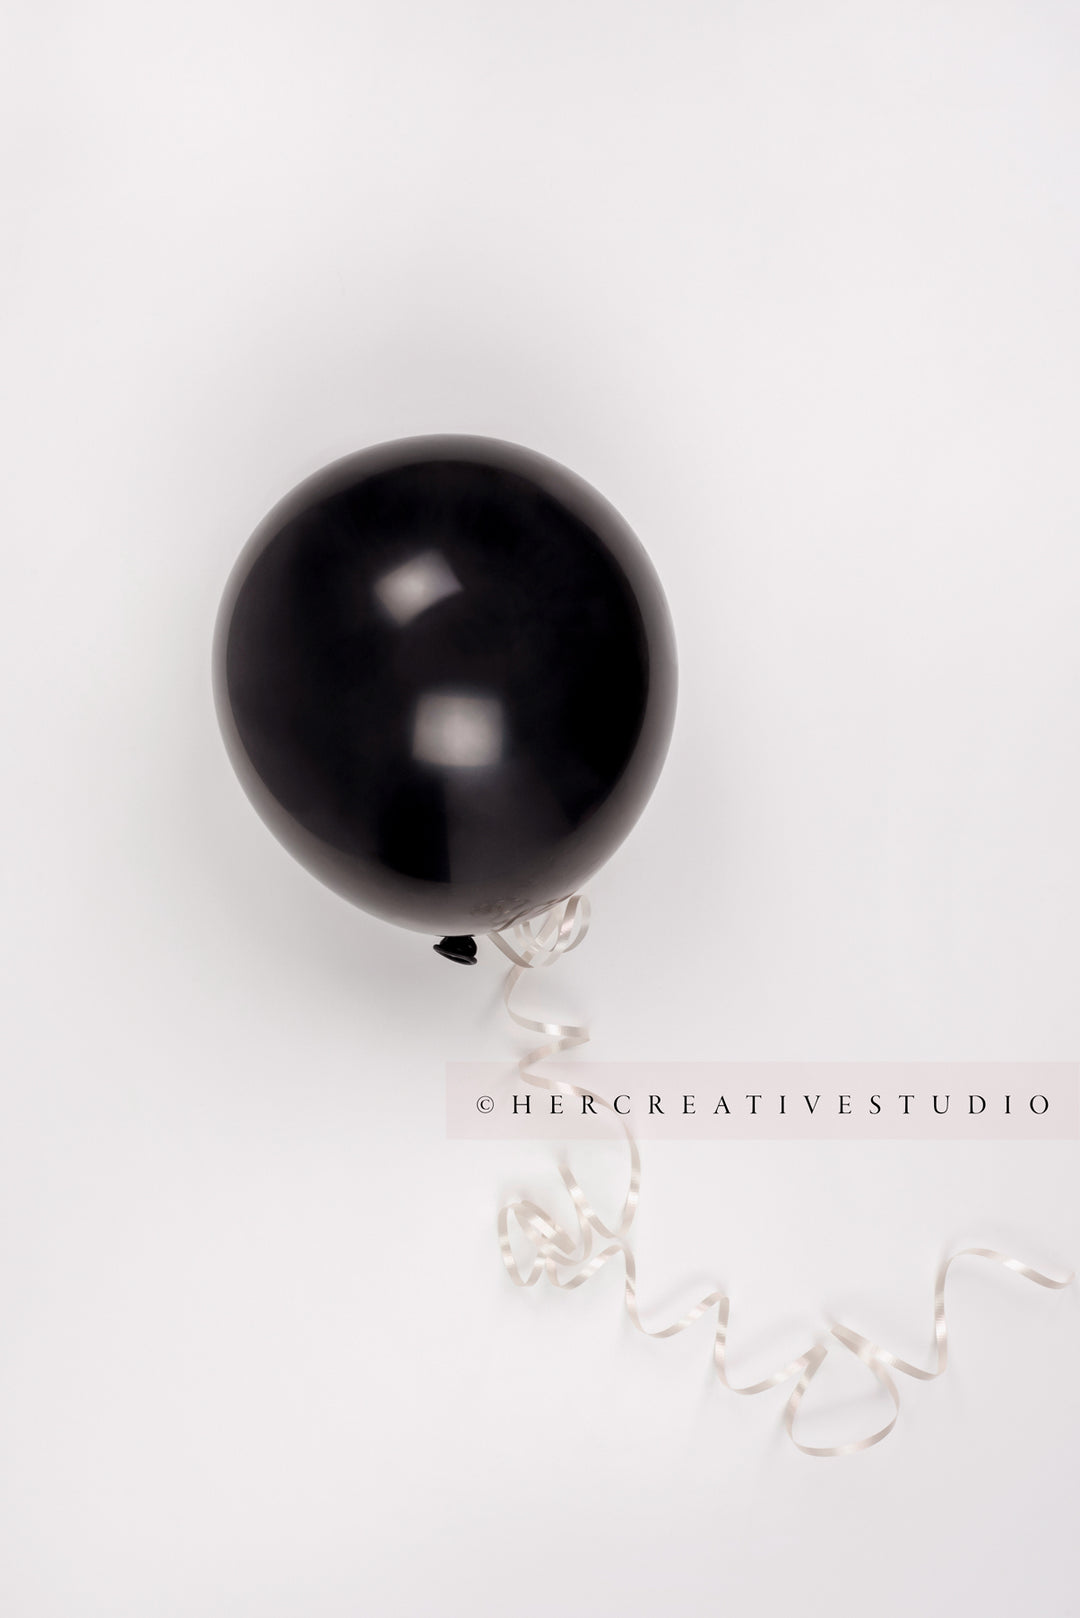 Black Balloons with White Ribbon, Styled Stock Image